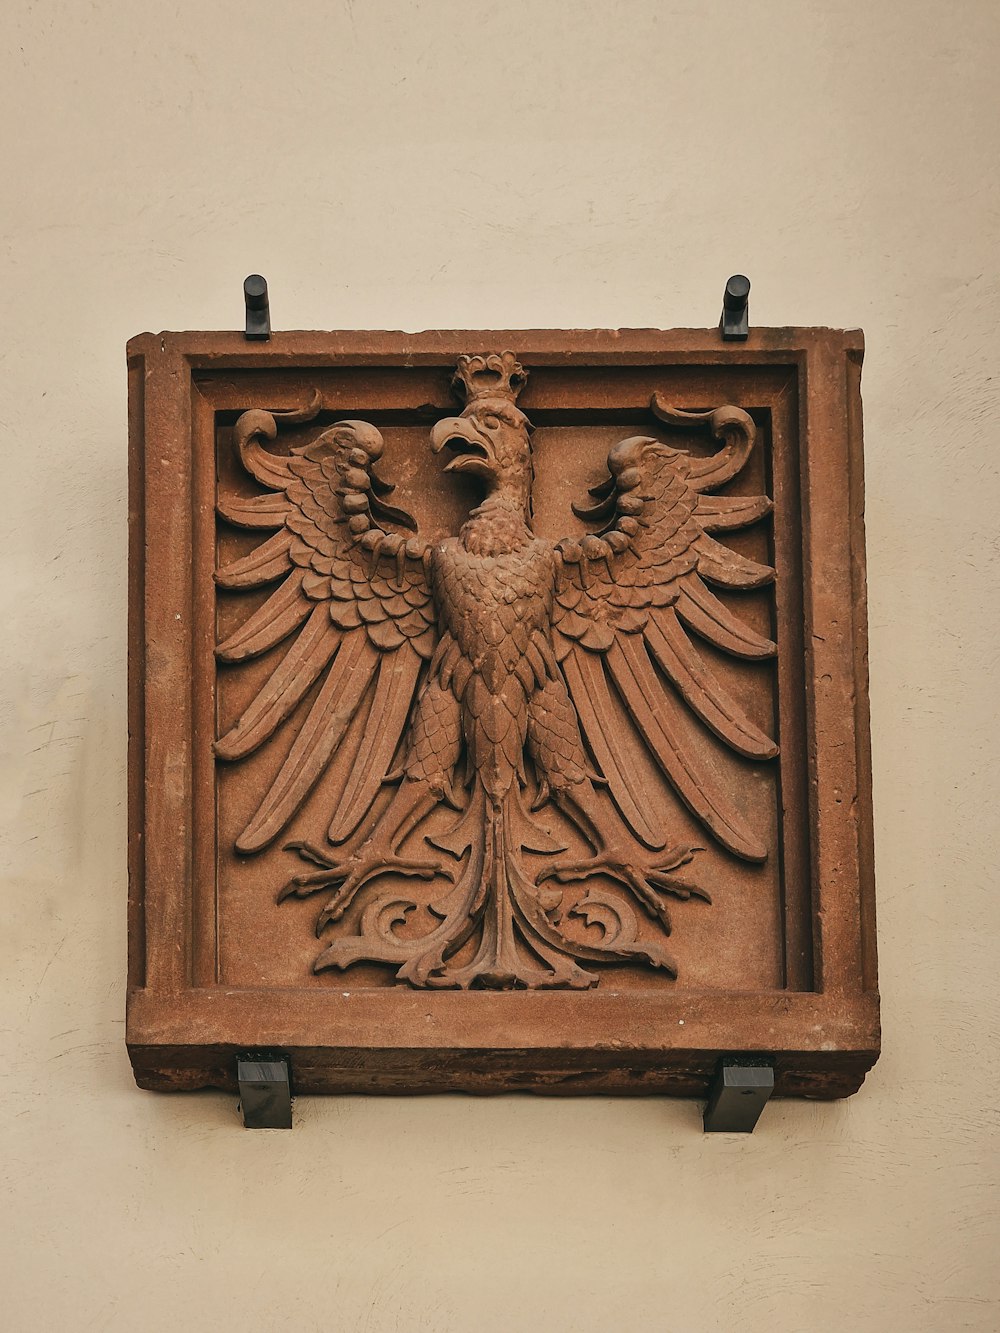 a decorative bird on the wall of a building